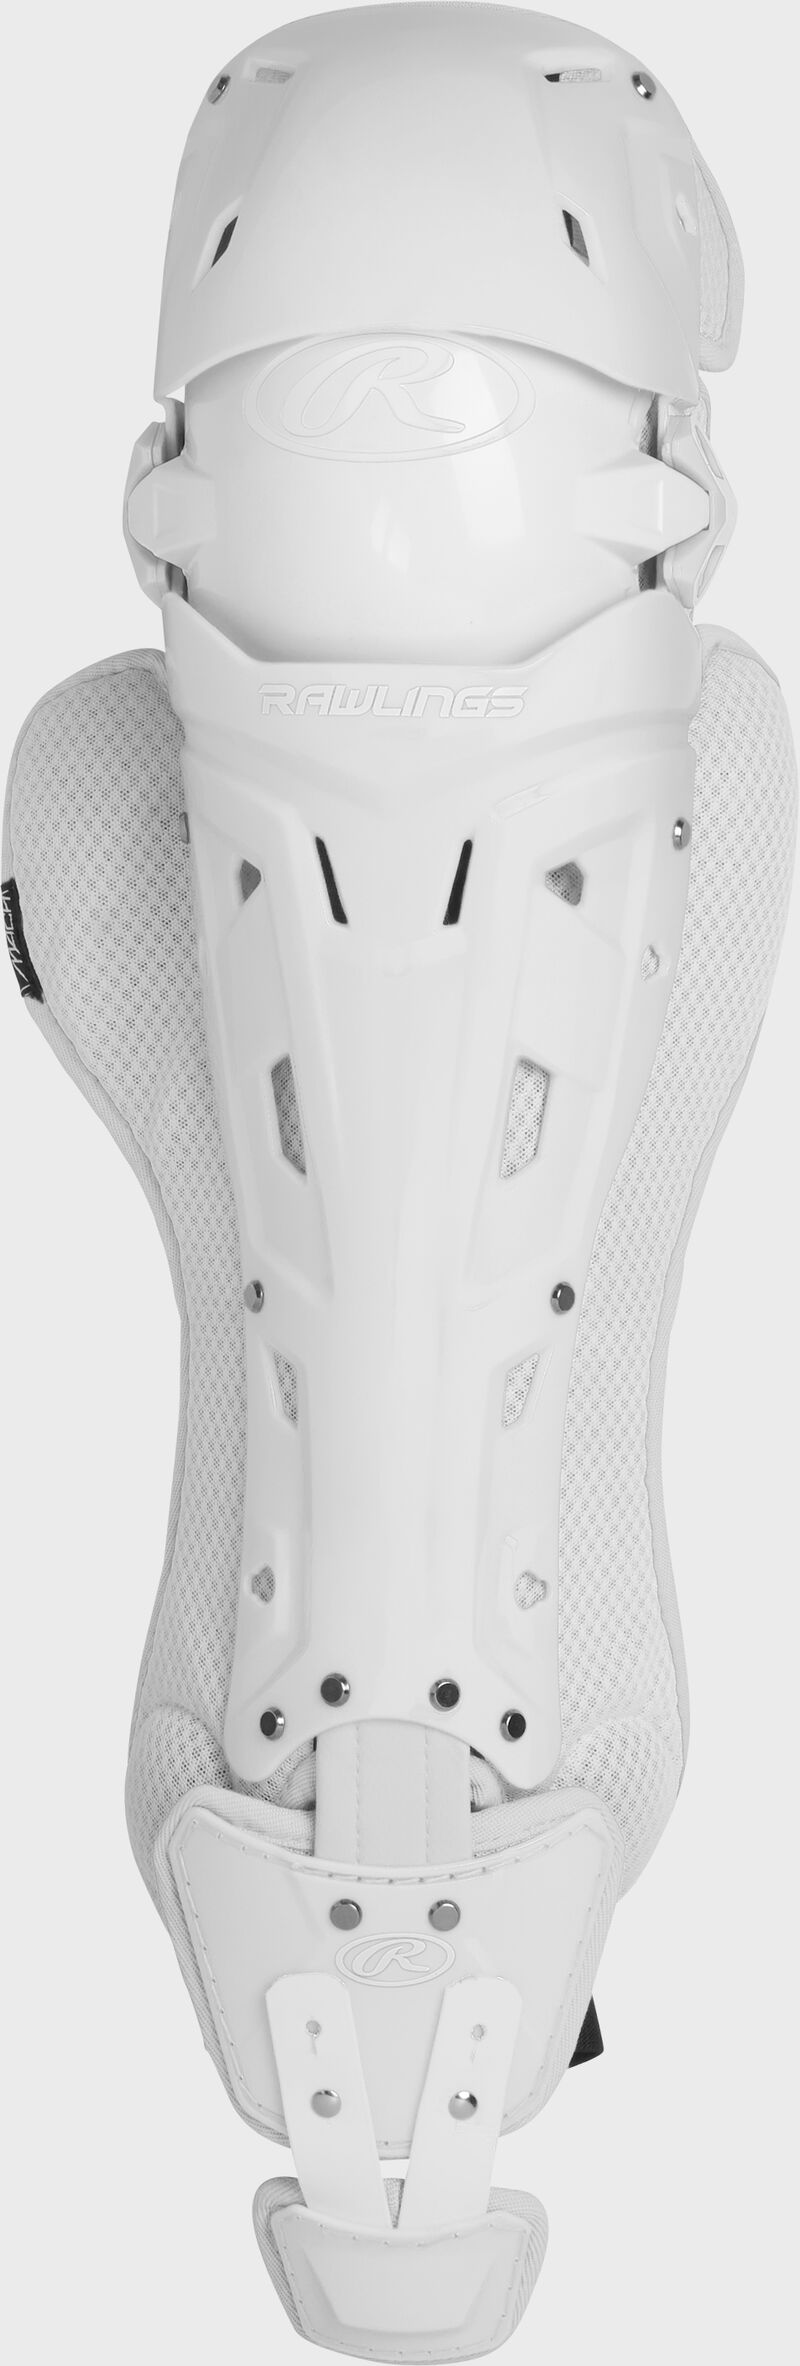 Front view of Rawlings Mach Leg Guards - SKU: MCHLG loading=